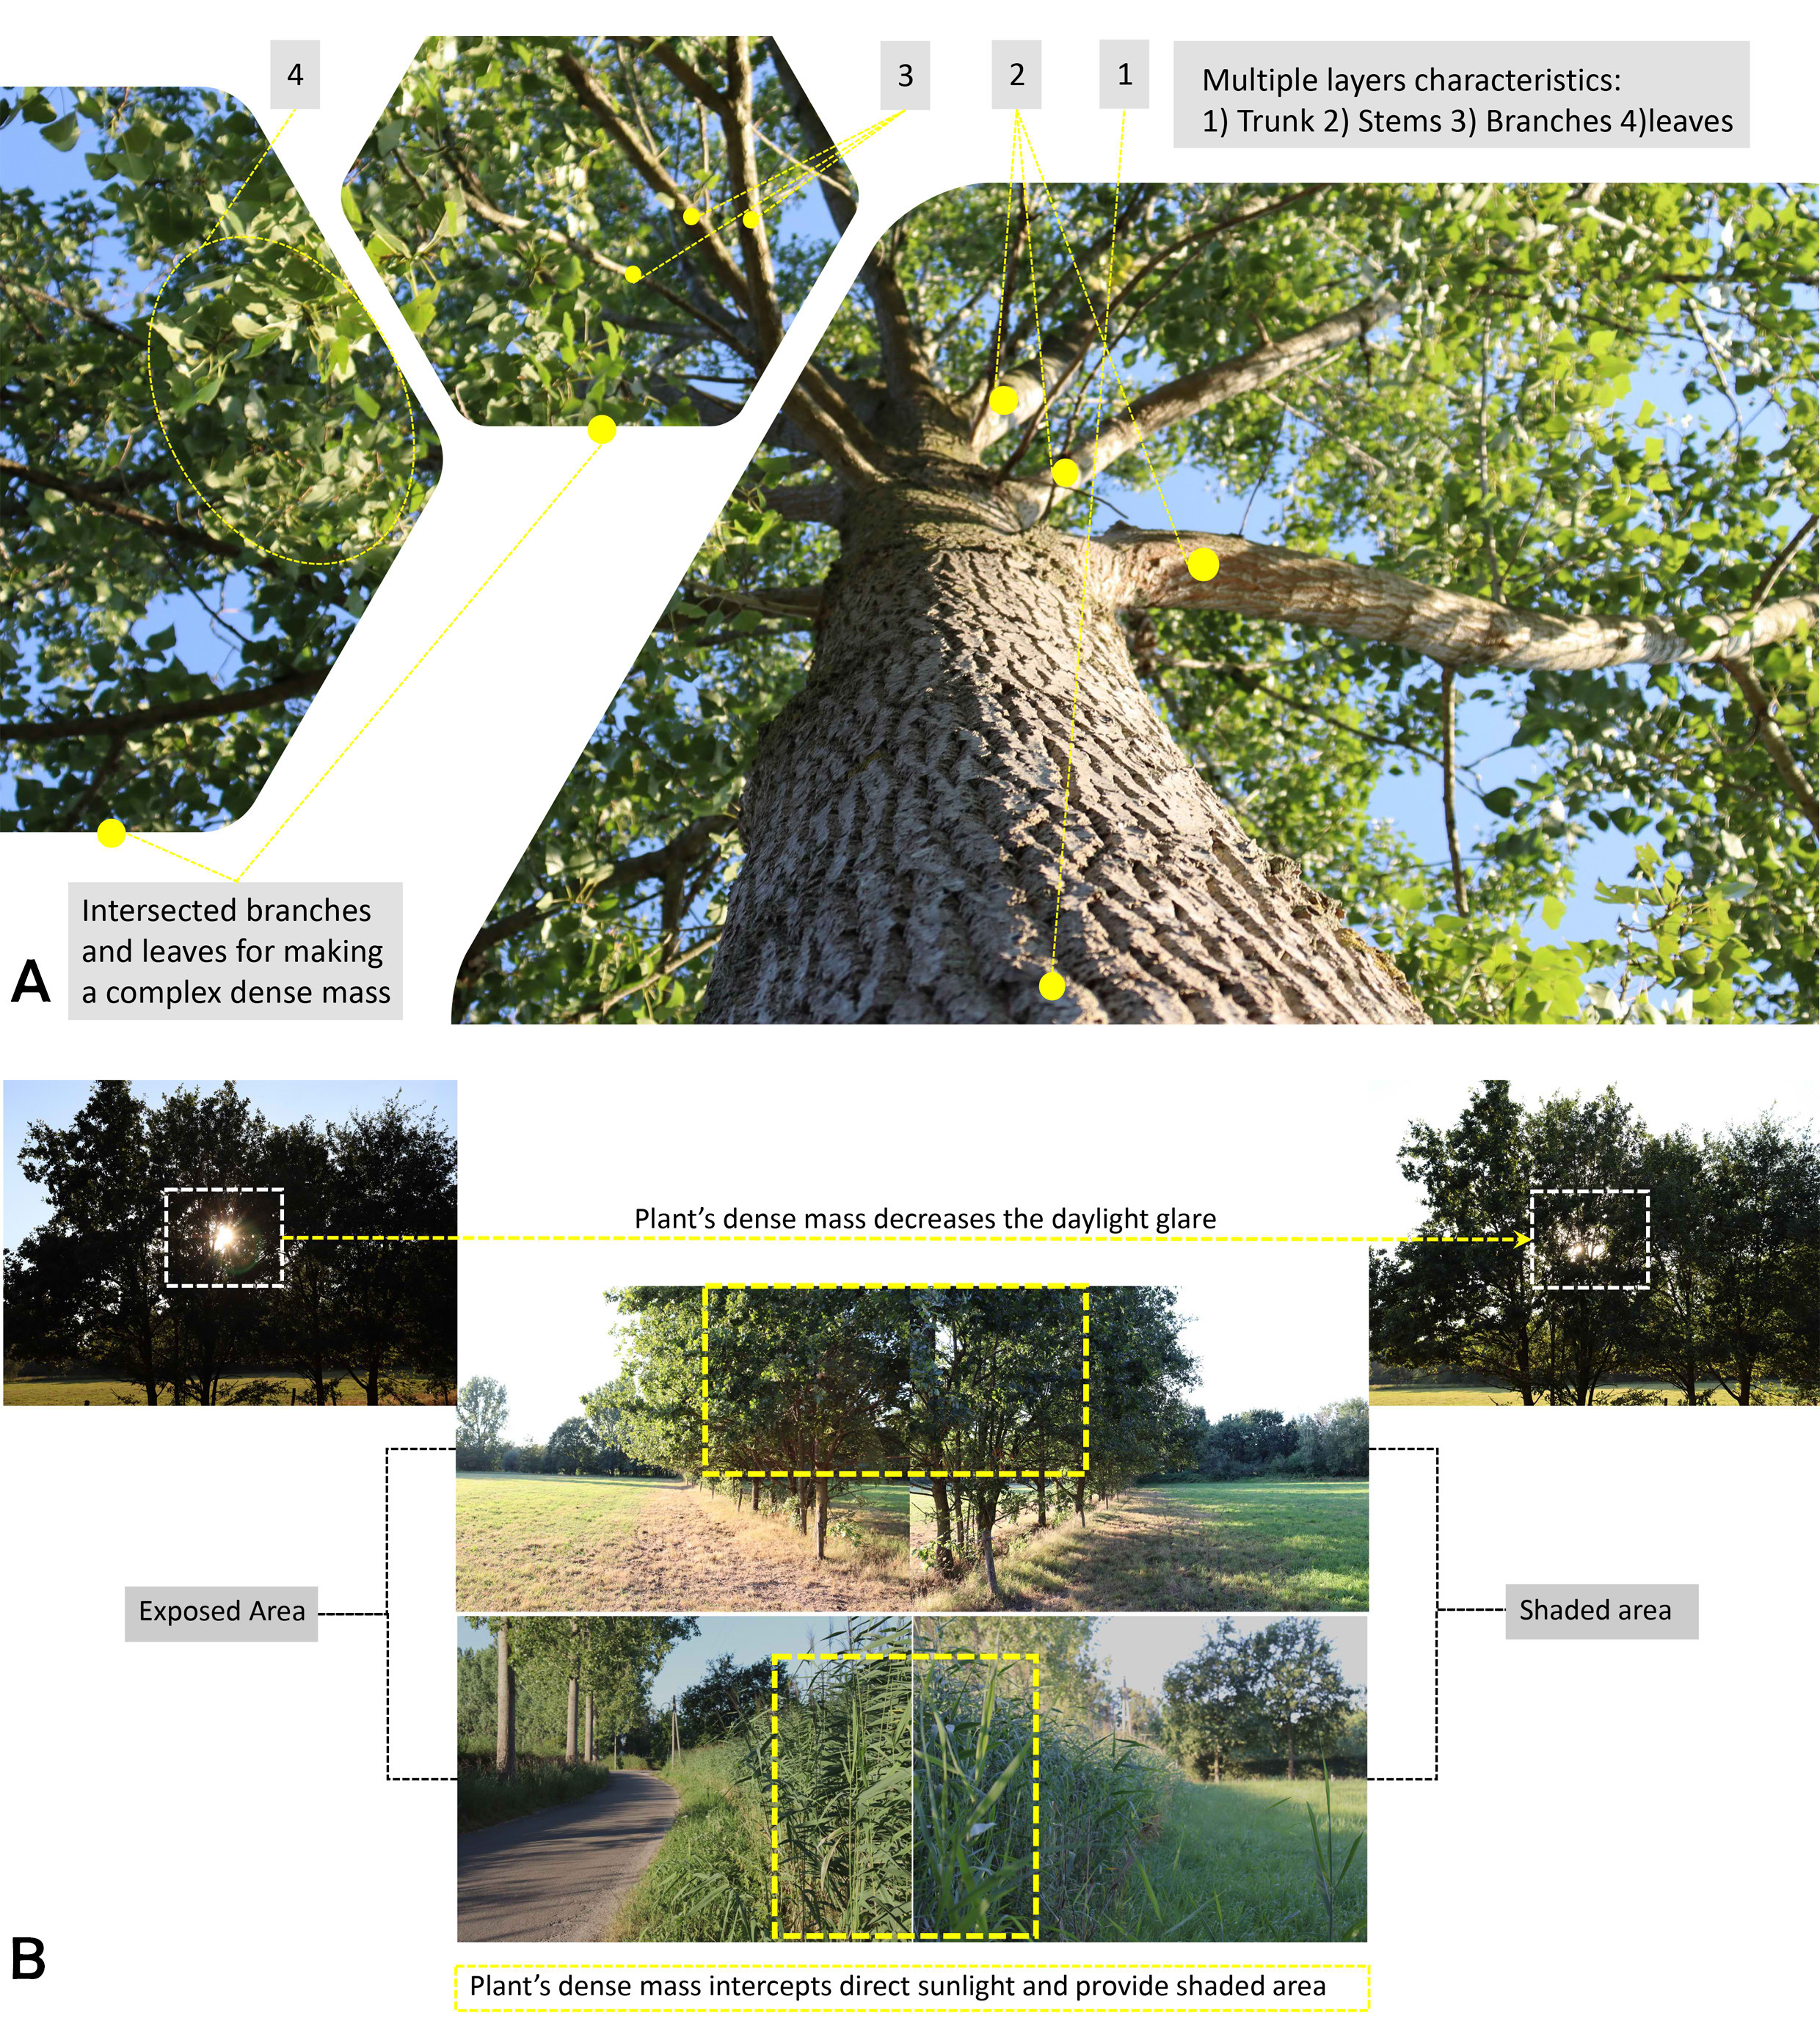 Complex, dense and intersected mass of trees control the daylight in their ambient environment.